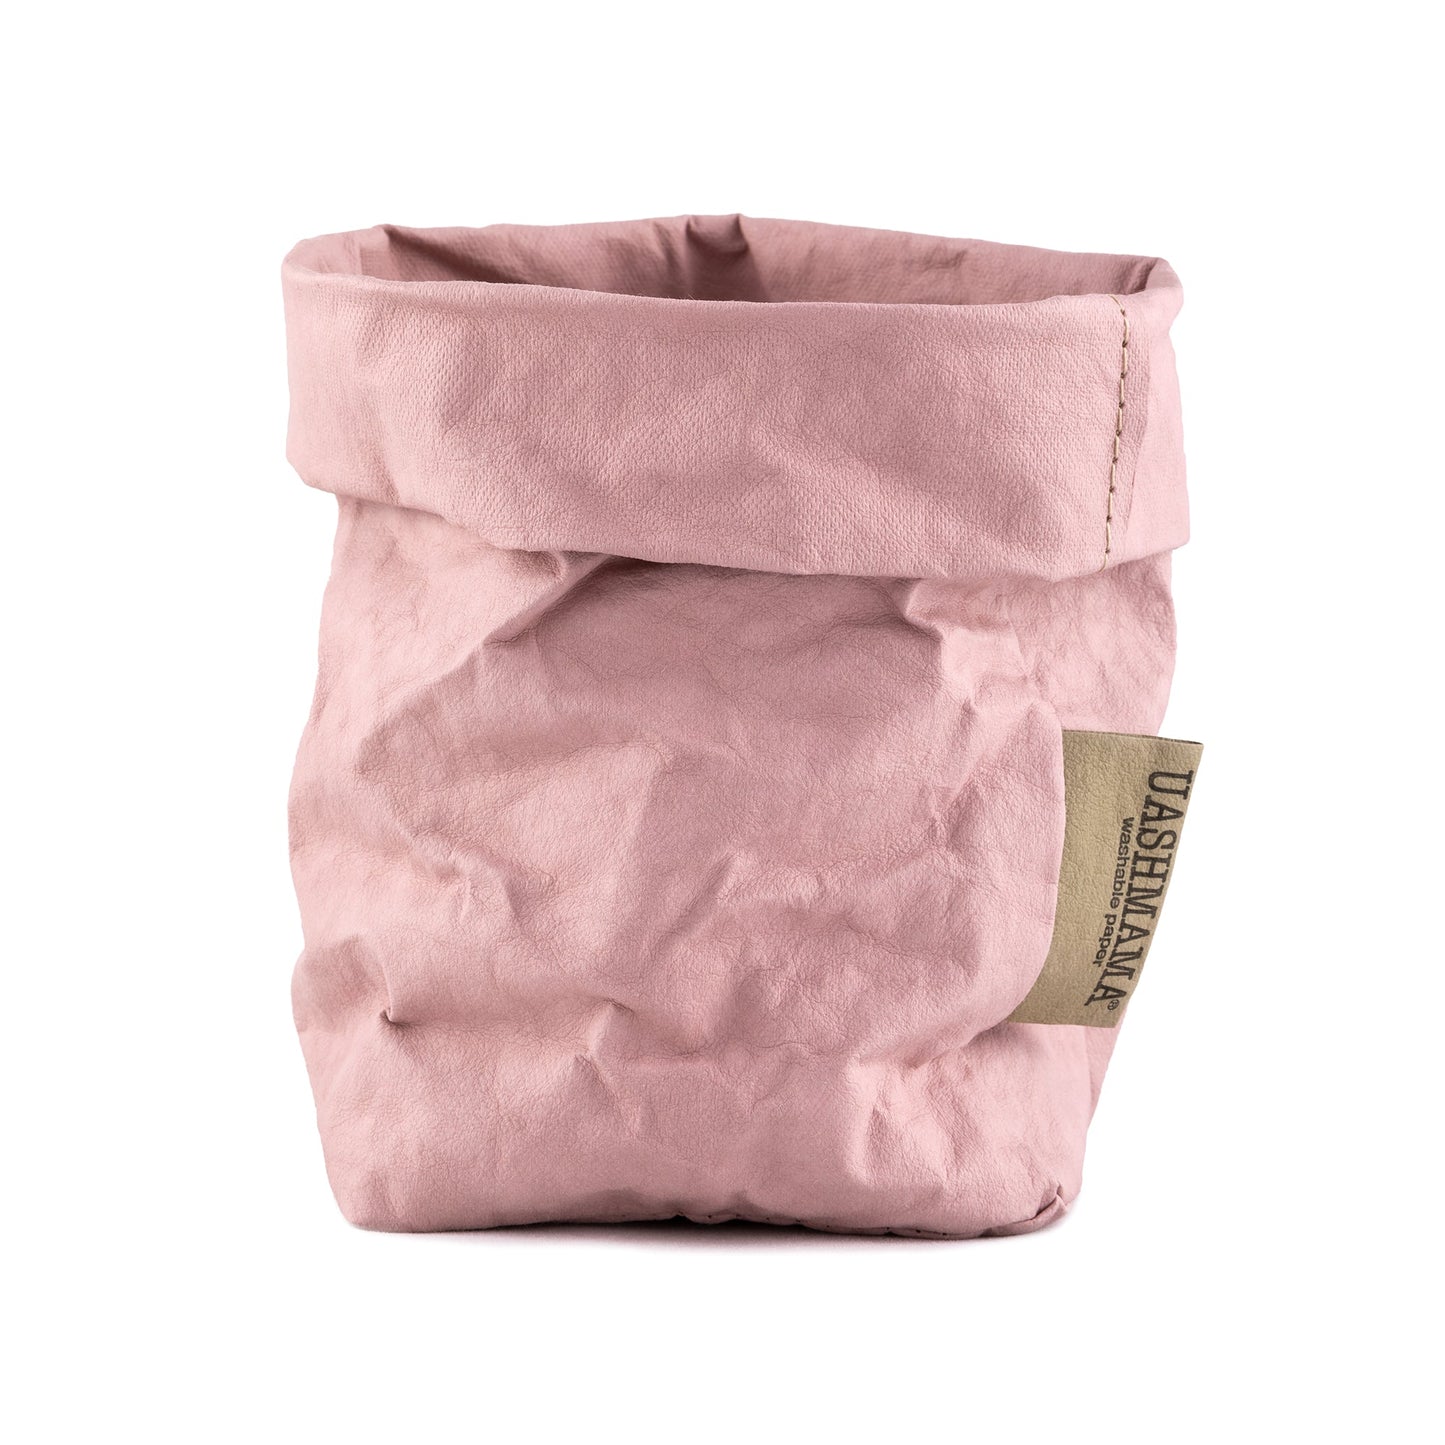 A washable paper bag is shown. The bag is rolled down at the top and features a UASHMAMA logo label on the bottom left corner. The bag pictured is the small size in pale pink.